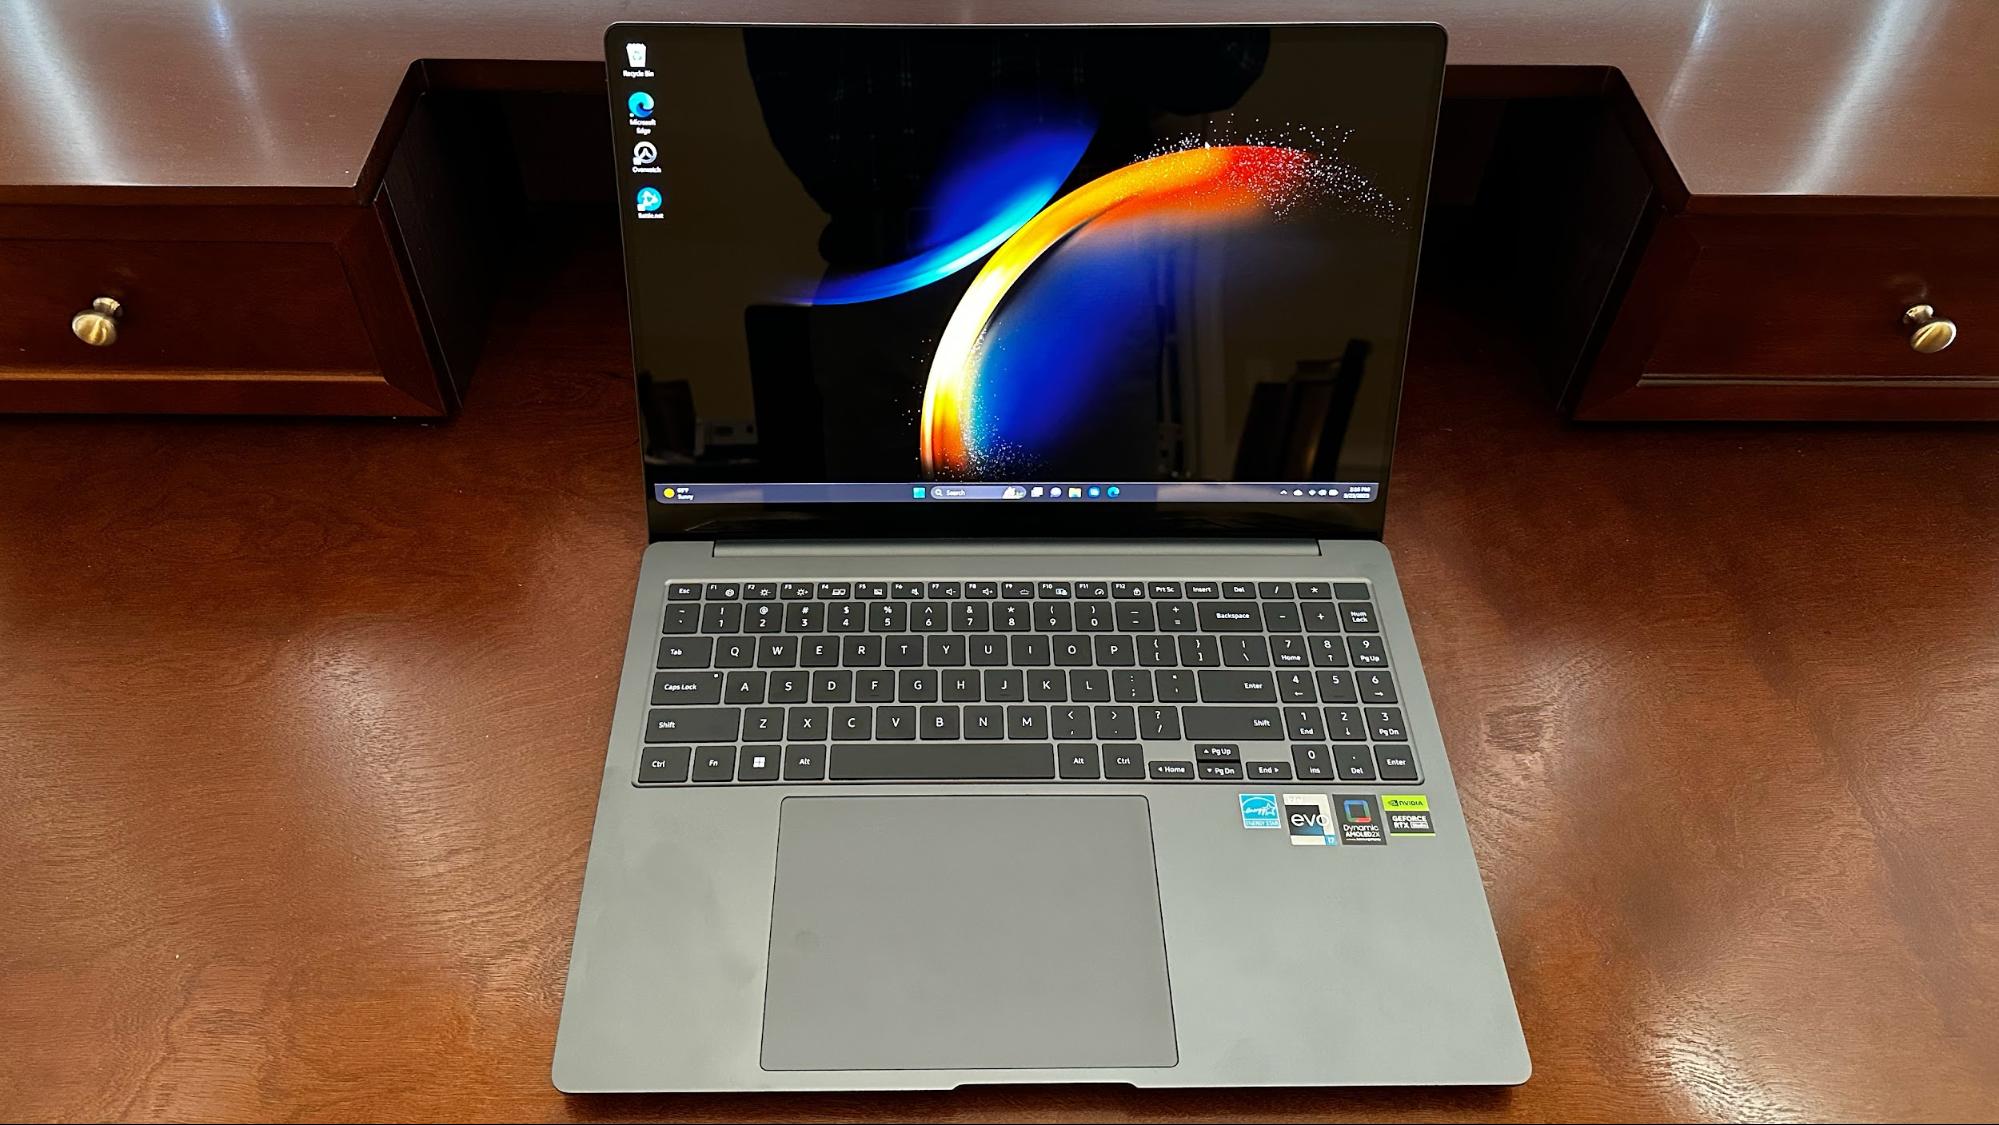 Samsung Galaxy Book 3 Ultra Review: An Unmatched Windows Laptop